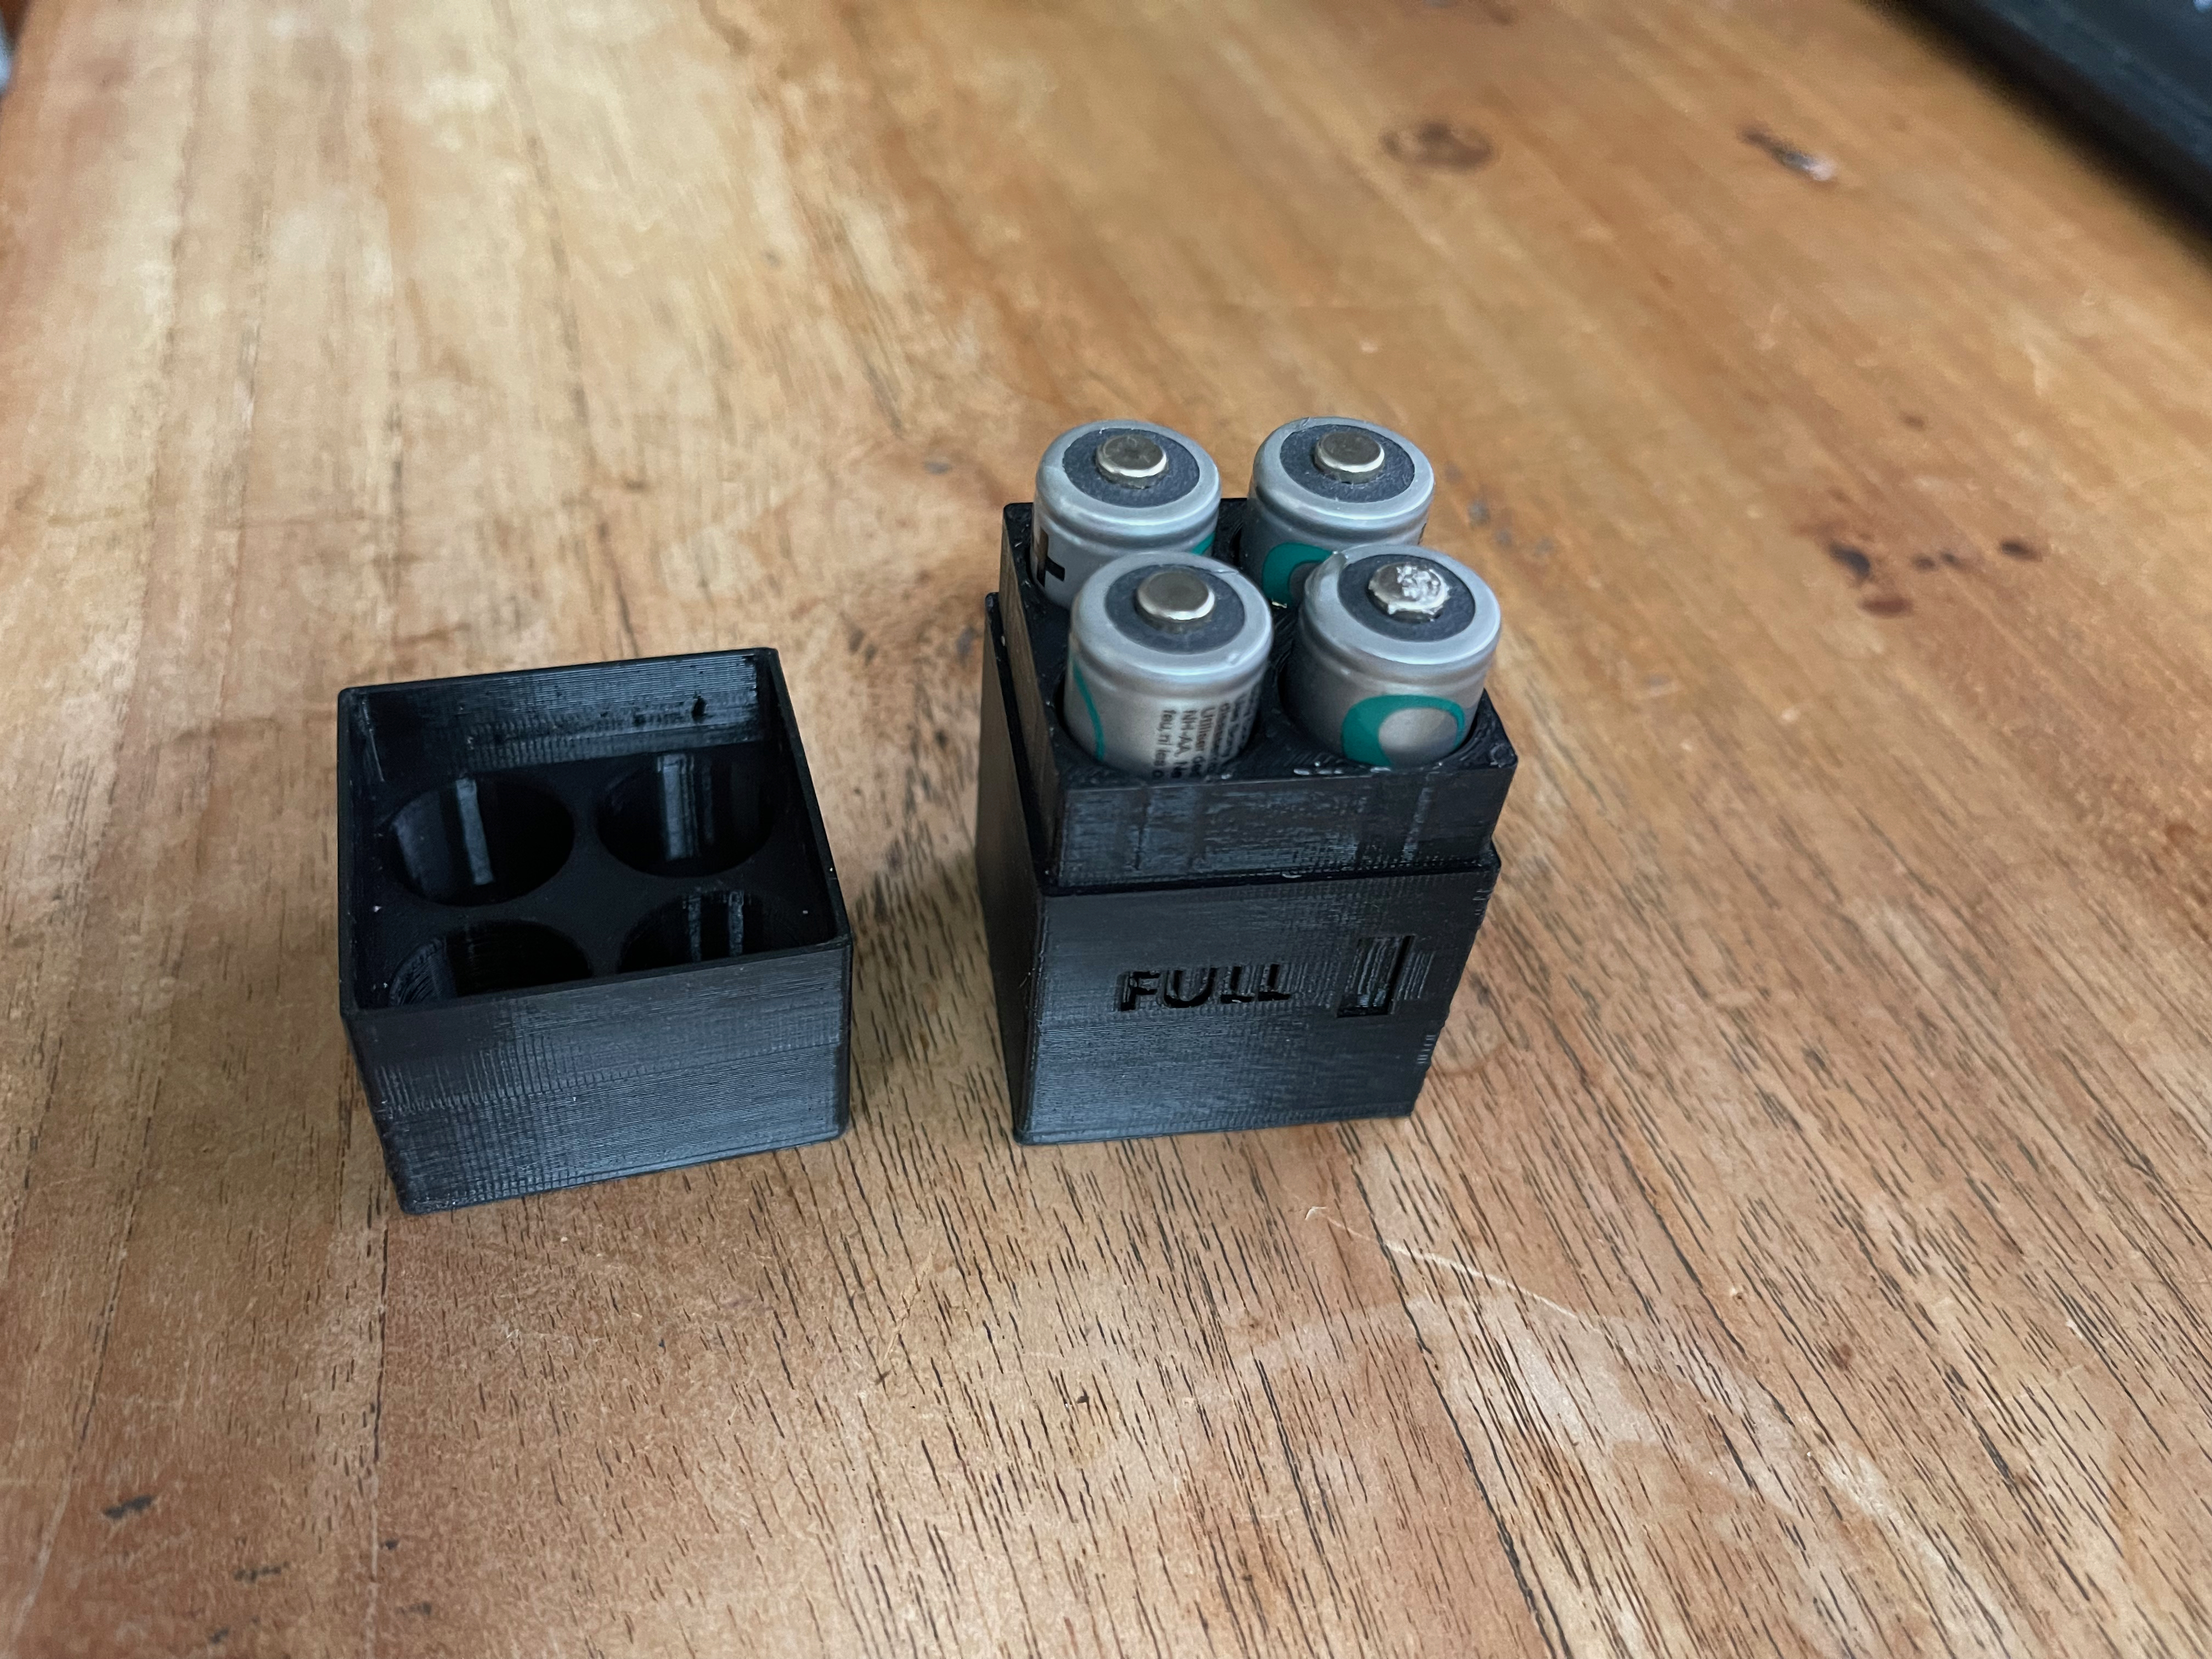 4xAA batteries box for travellers